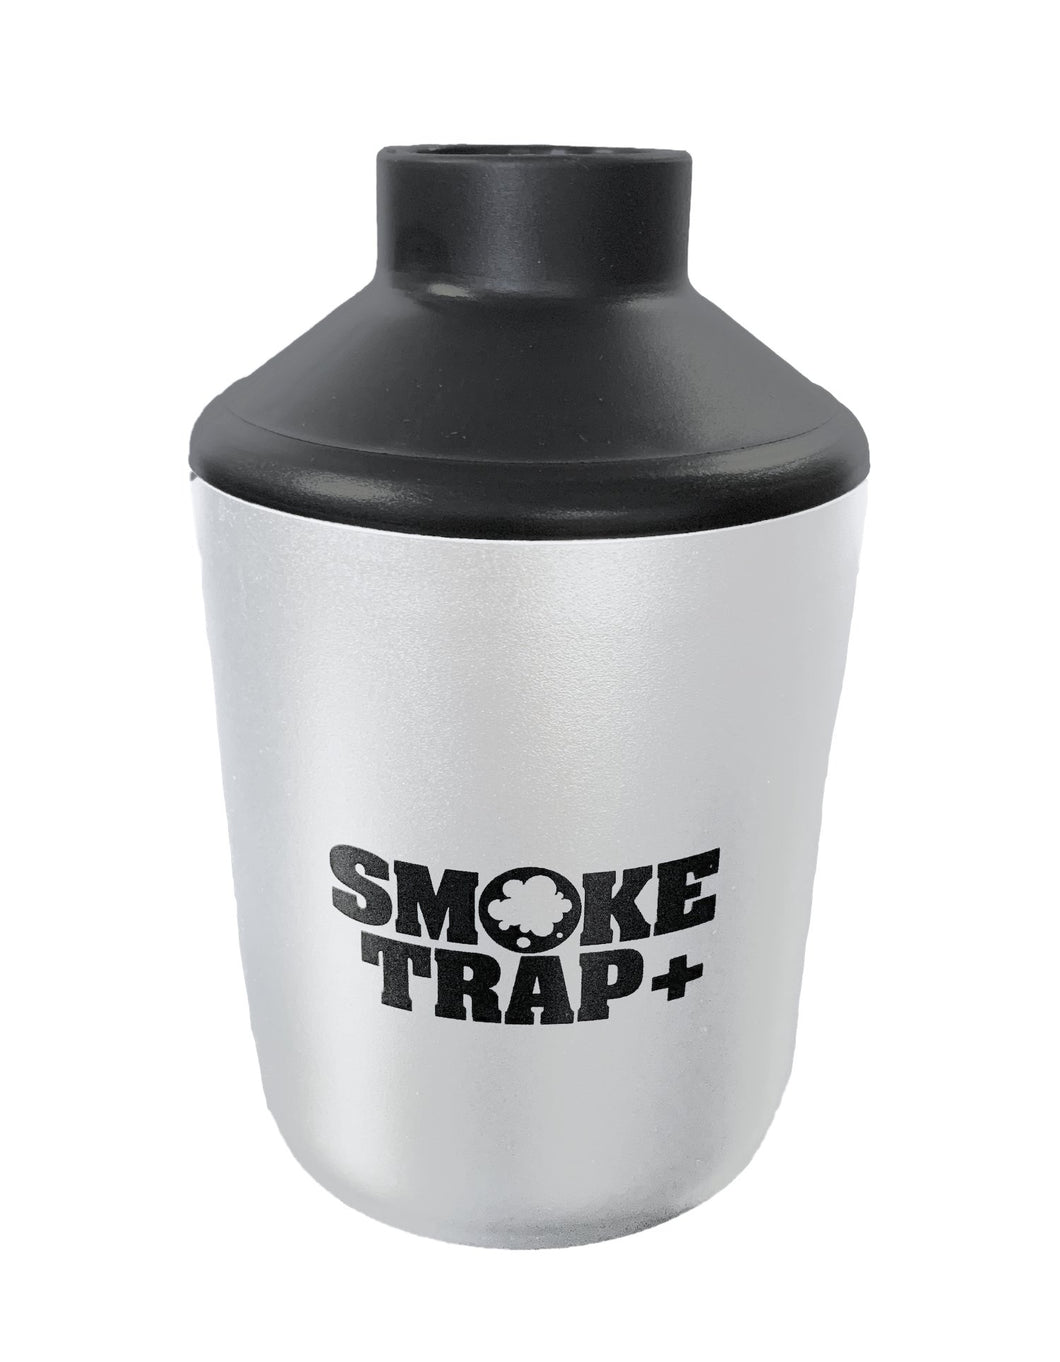 SMOKE TRAP 2.0 Personal Air Filter sploof/buddy Smoke Filter With  Replaceable Filter Cartridges Long-lasting 300 Uses black -  Denmark